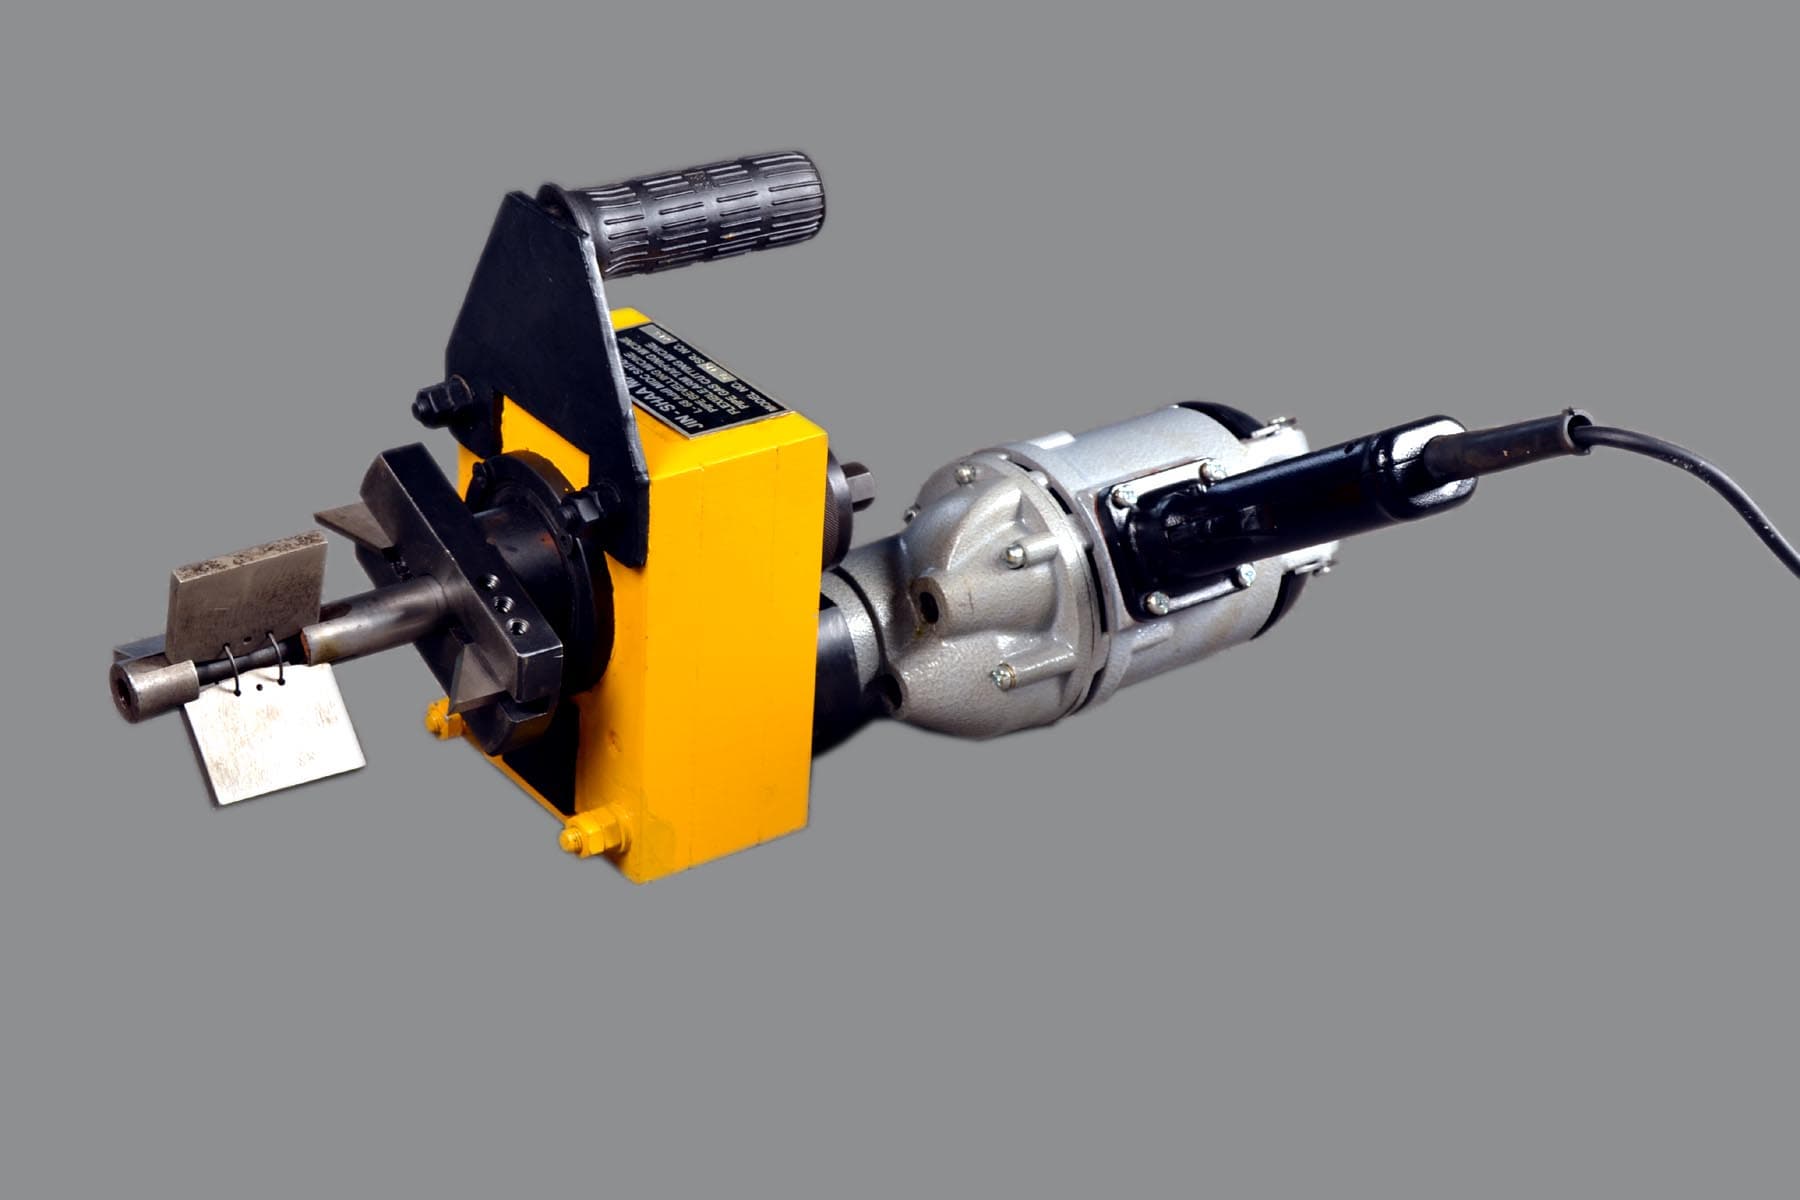 Portable Pipe Bevelling Machine